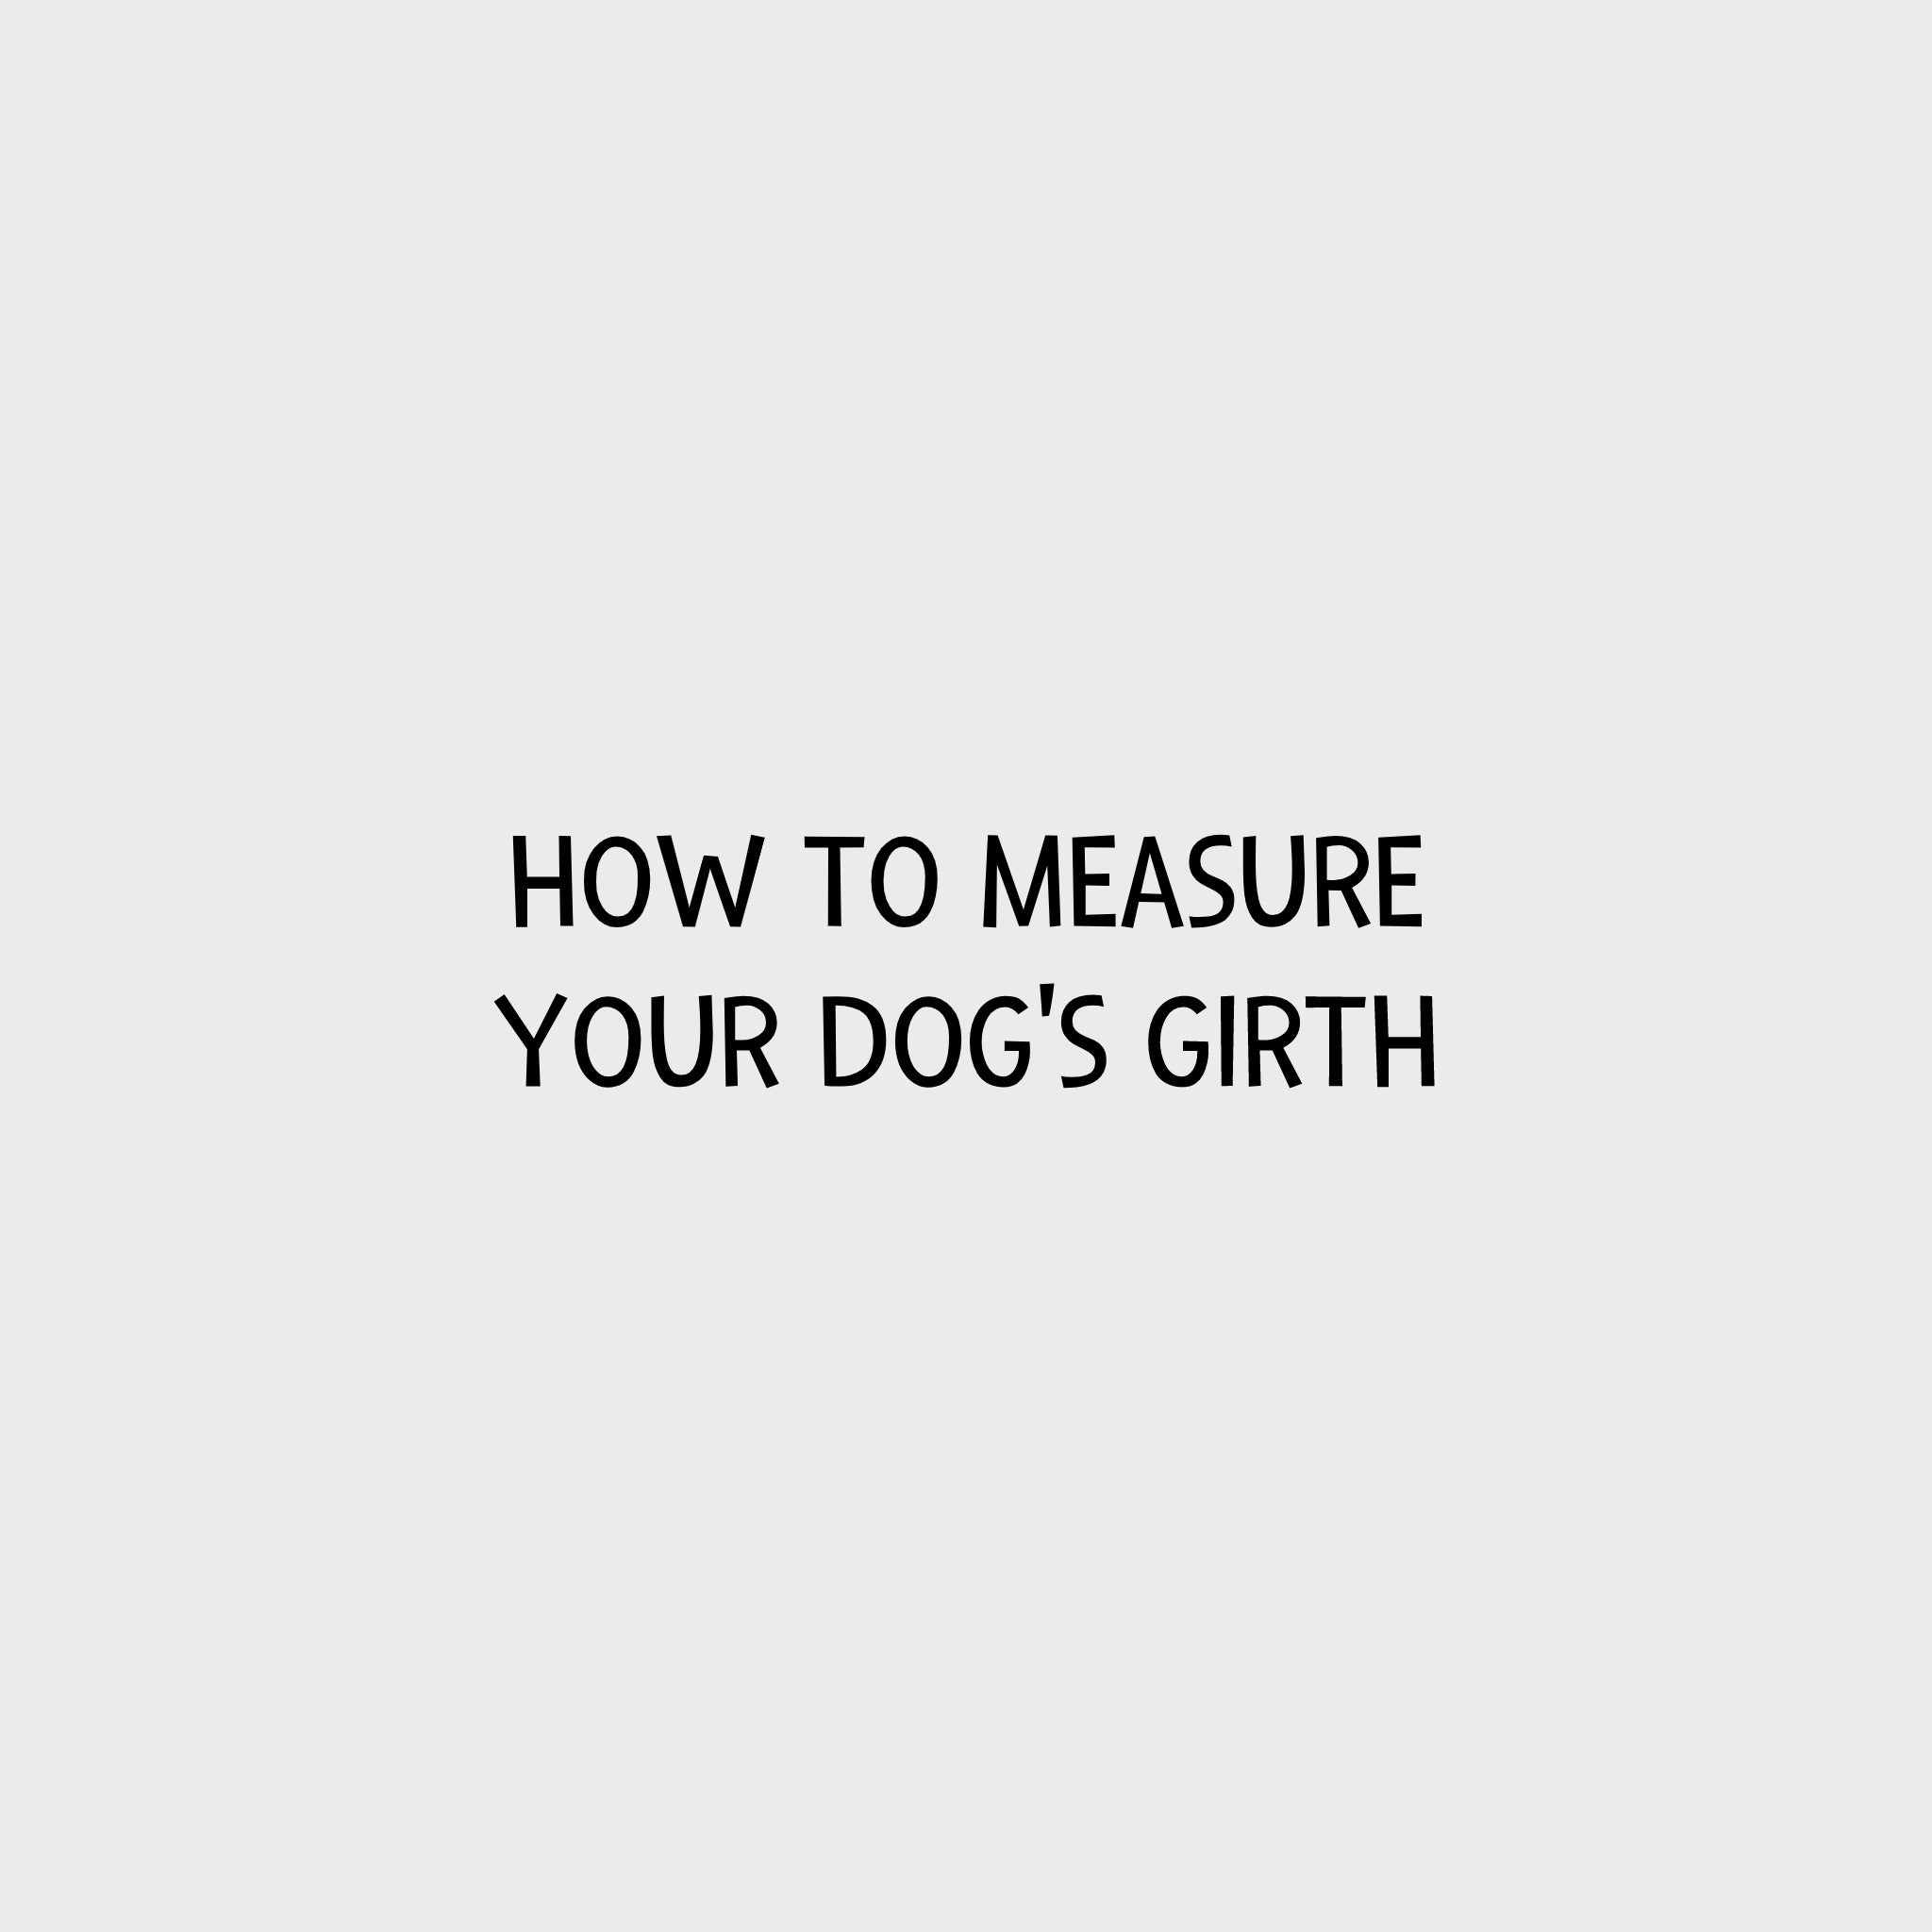 Video - How to measure your dog's girth